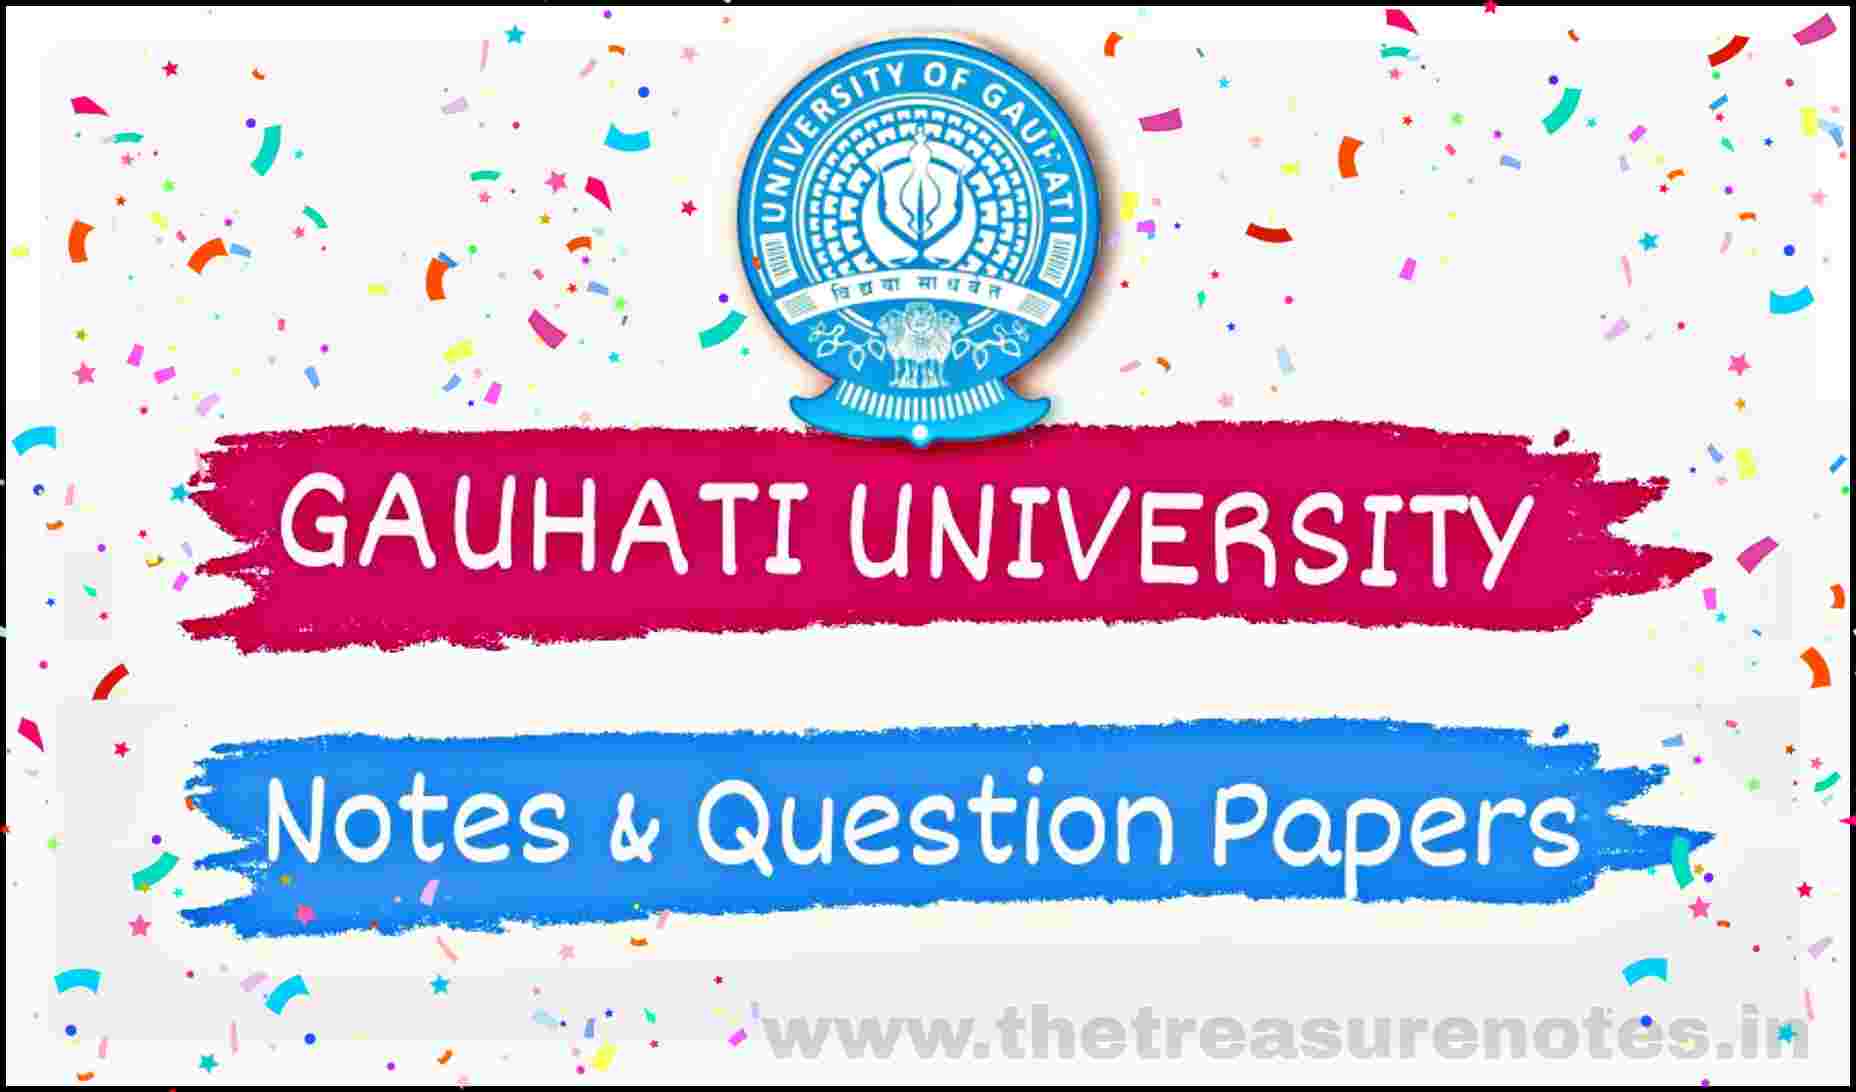 GAUHATI UNIVERSITY NOTES AND PREVIOUS YEAR QUESTION PAPER FOR B.COM BSC BA